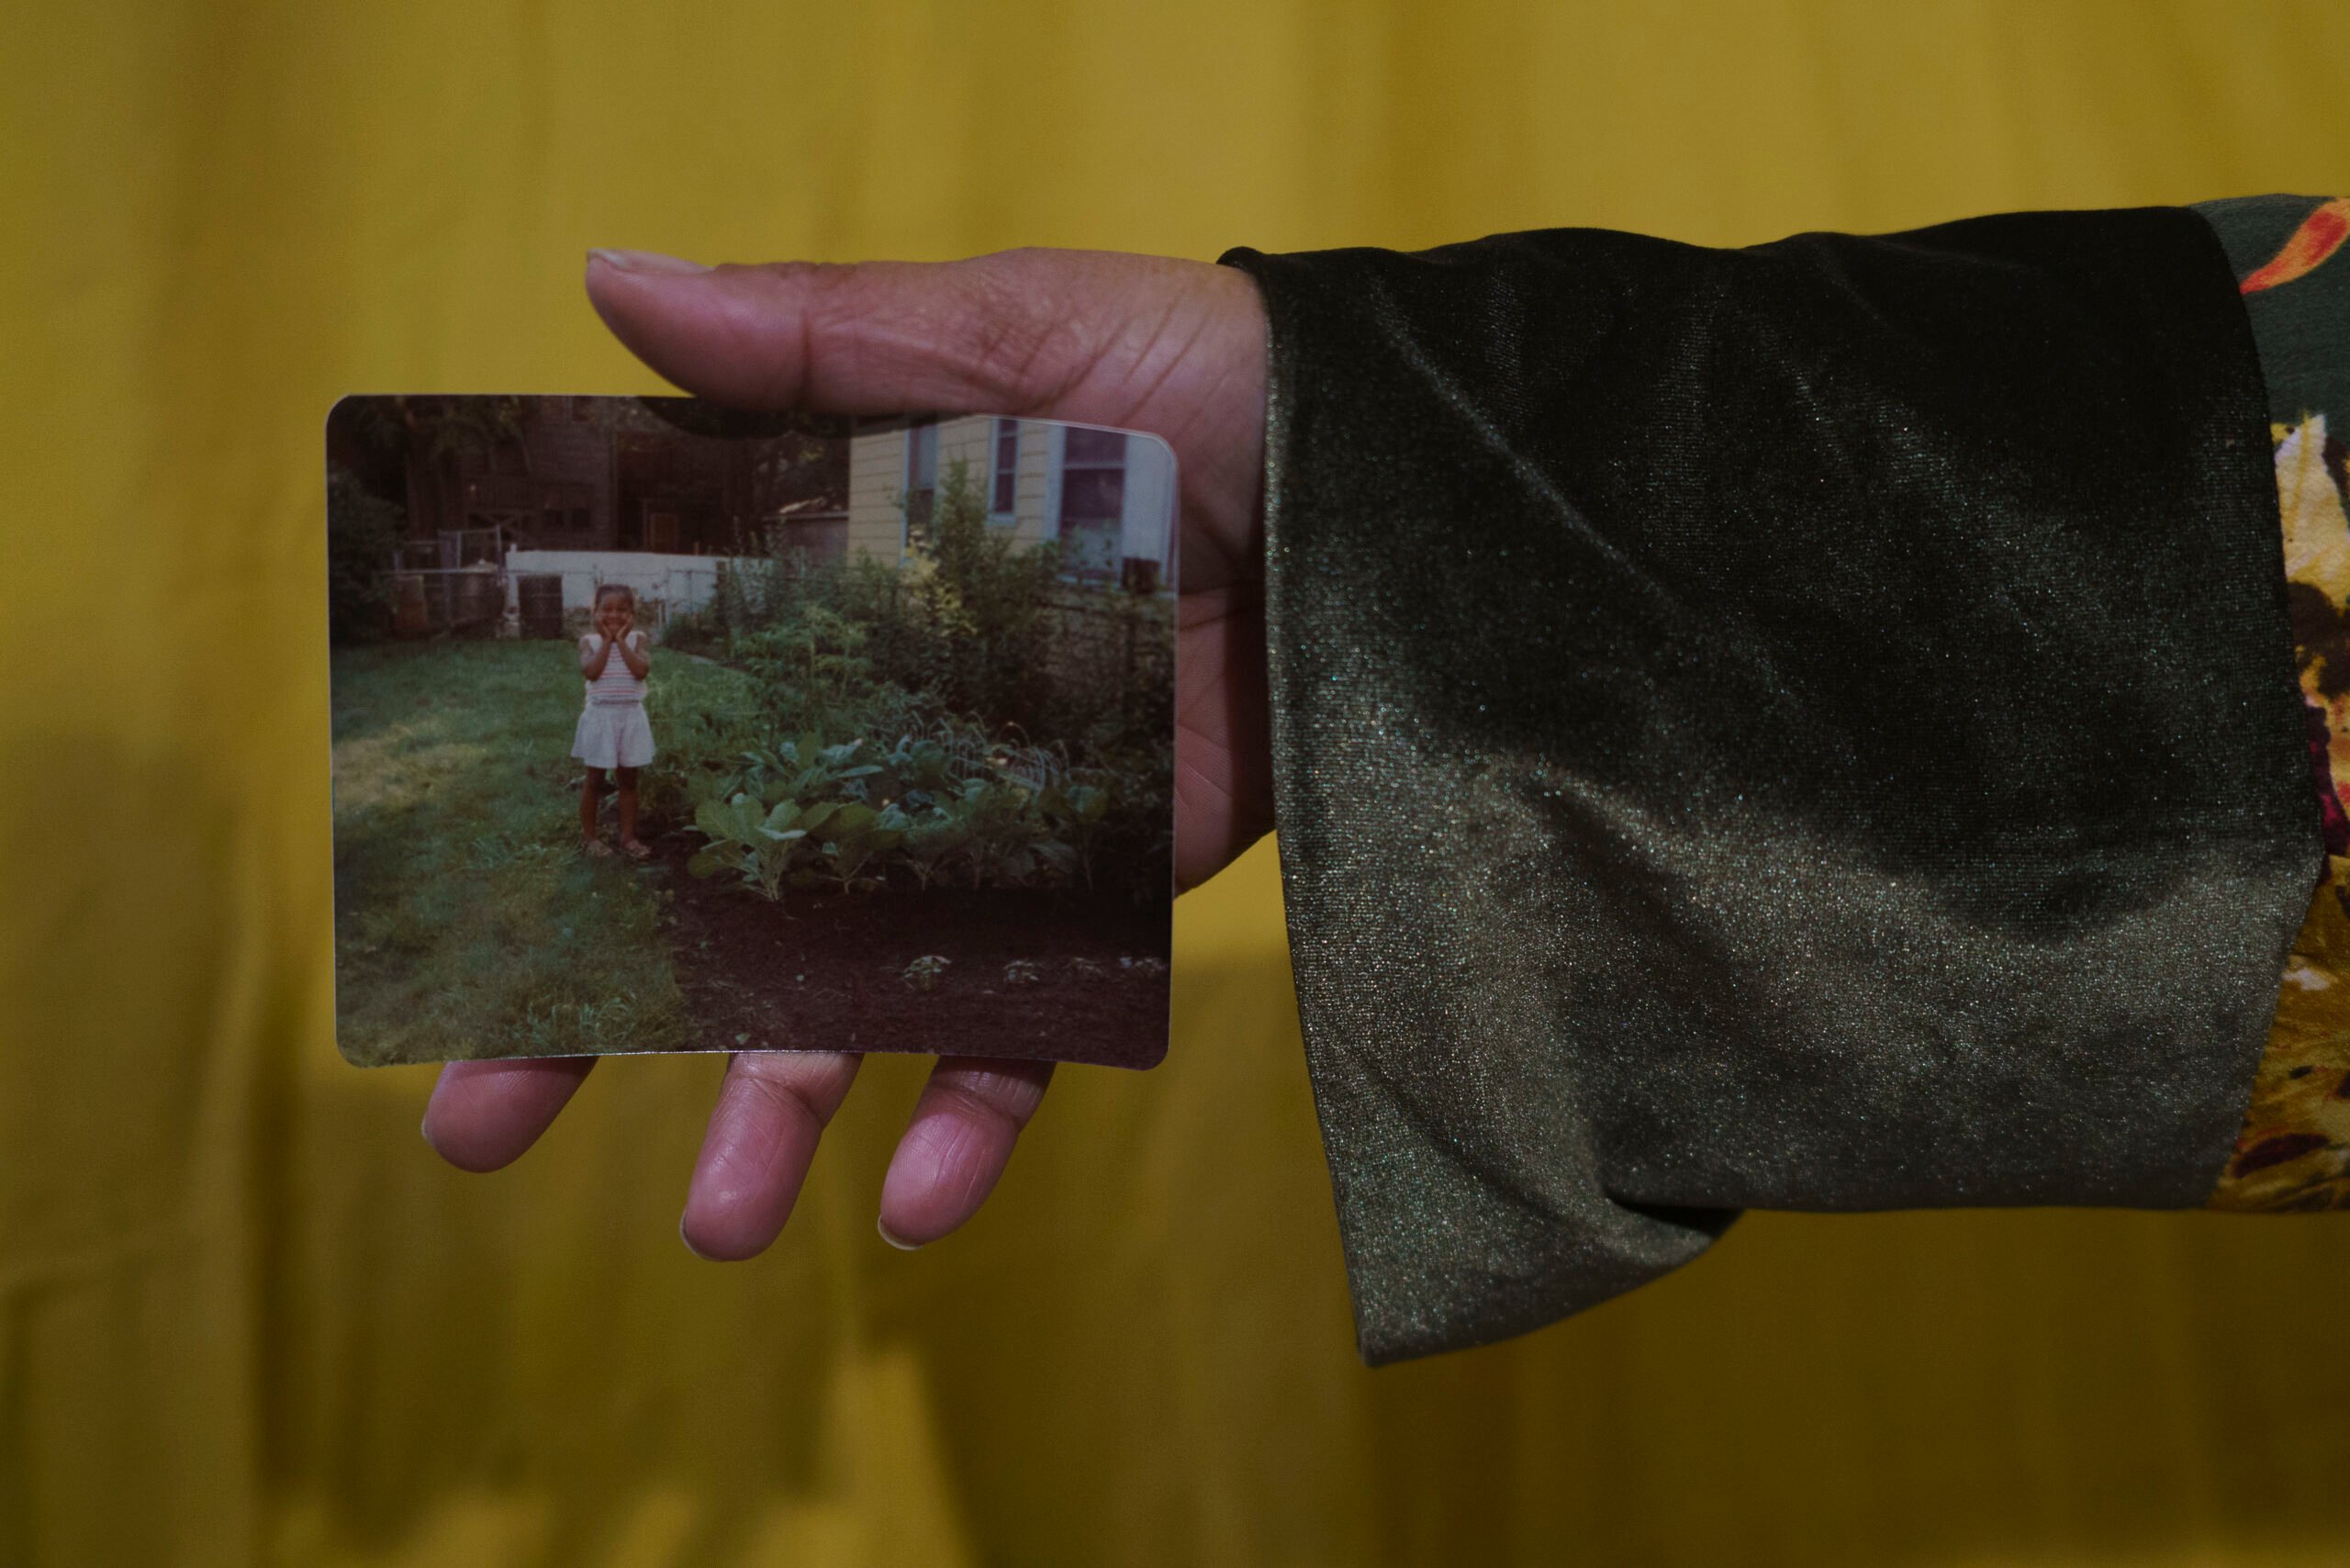 A person's hand holds a photograph print with rounded corners, showing a child standing next to a garden